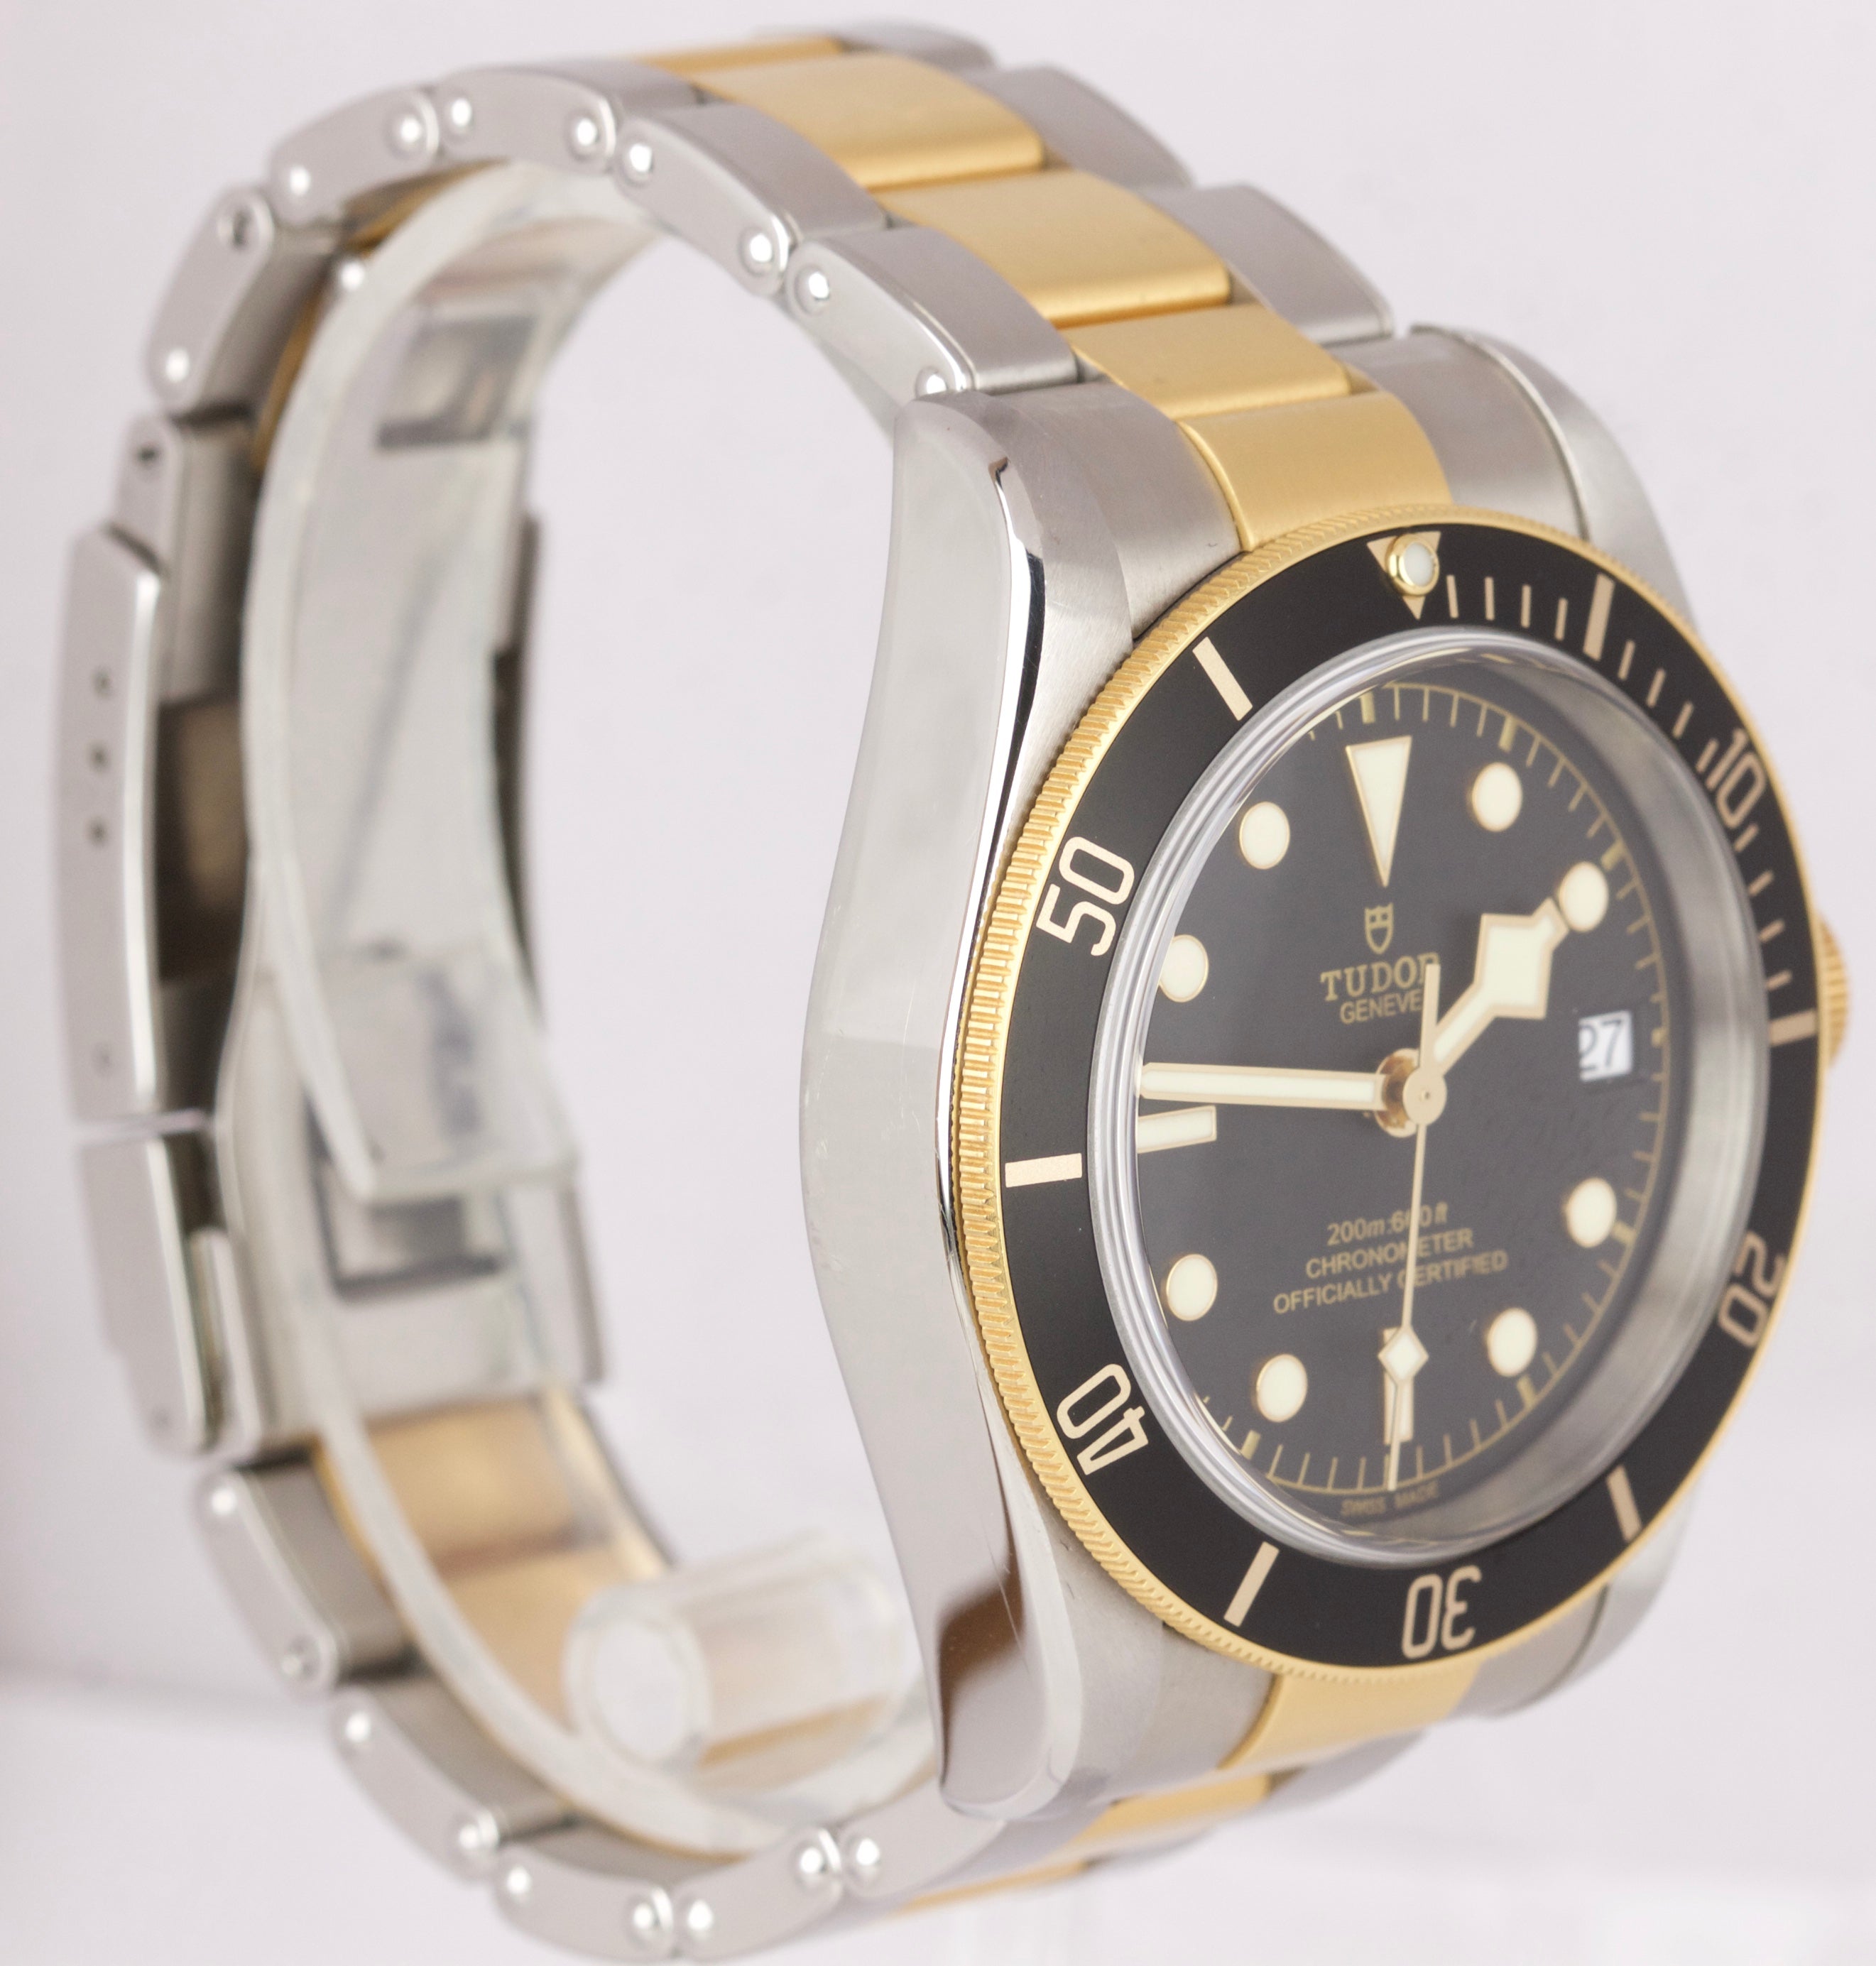 MINT 2019 Tudor Black Bay Heritage Two-Tone Stainless Black 41mm Watch